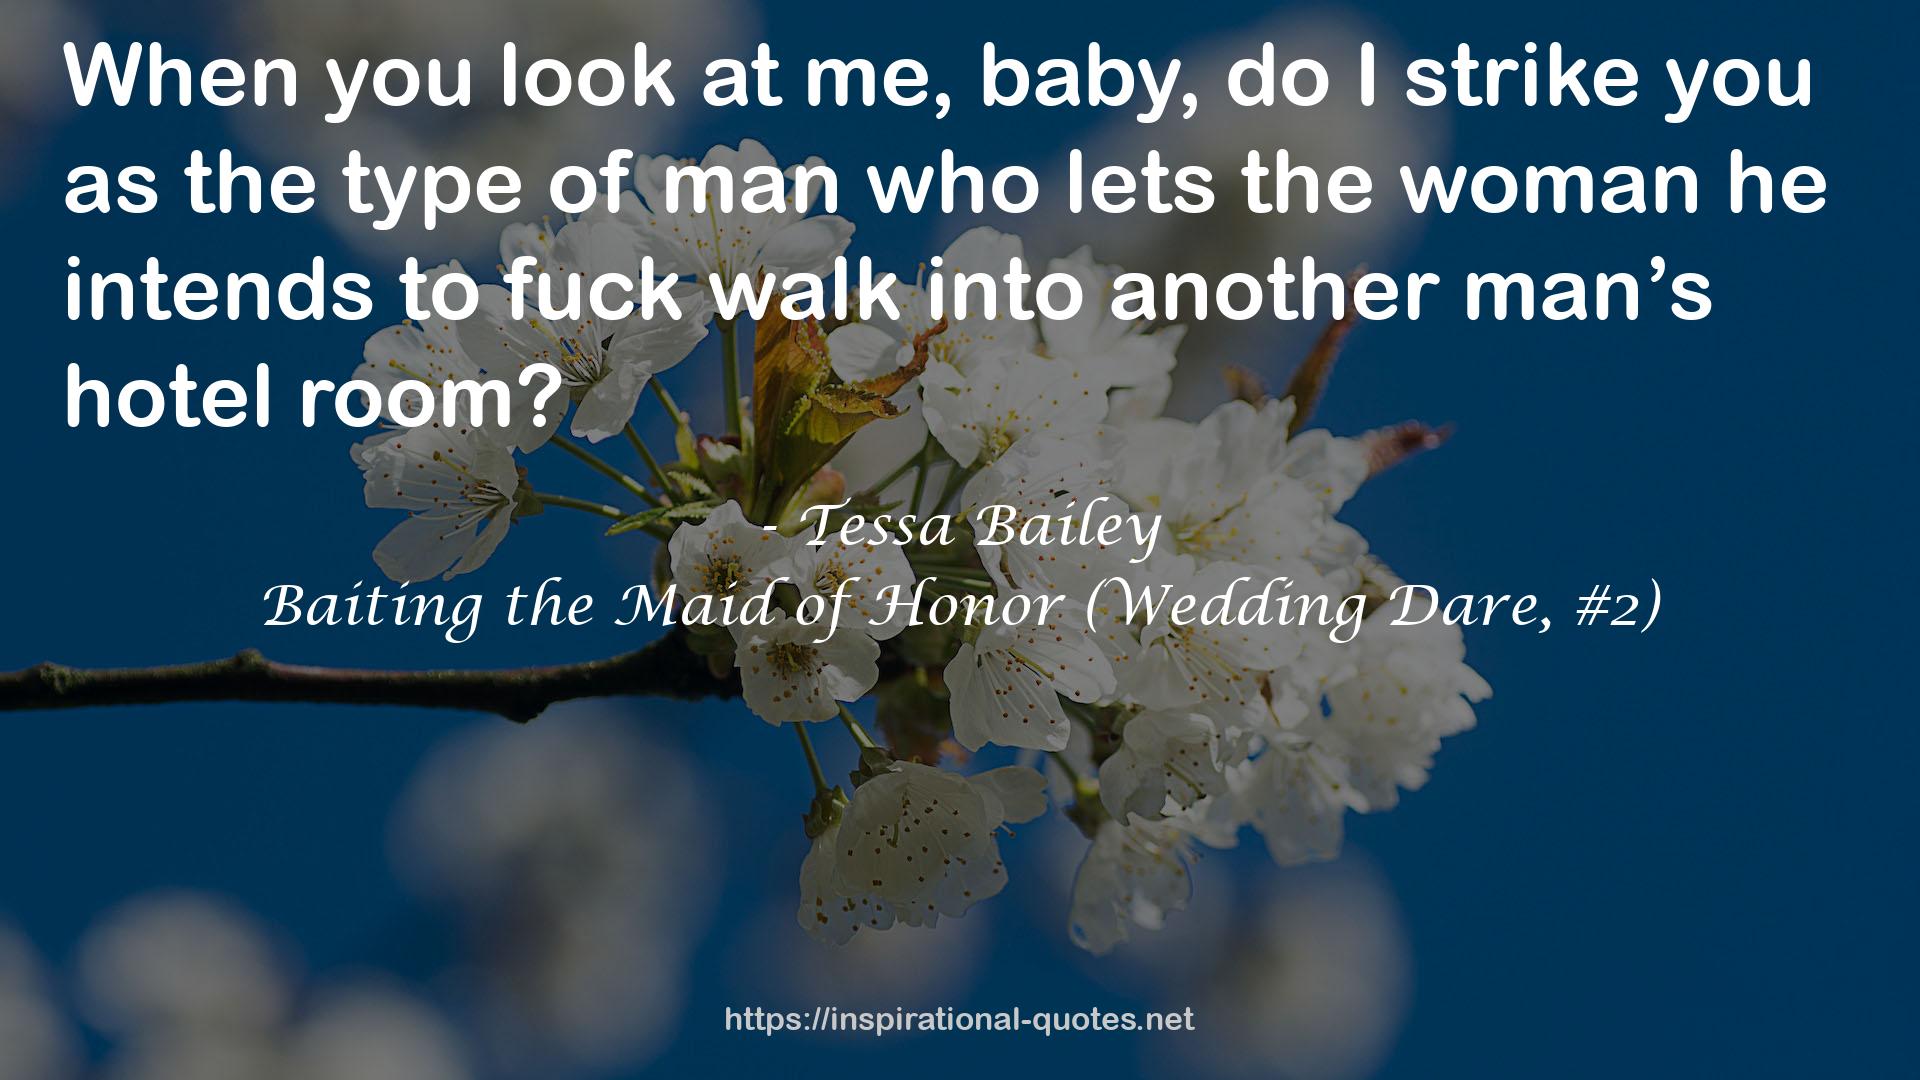 Baiting the Maid of Honor (Wedding Dare, #2) QUOTES